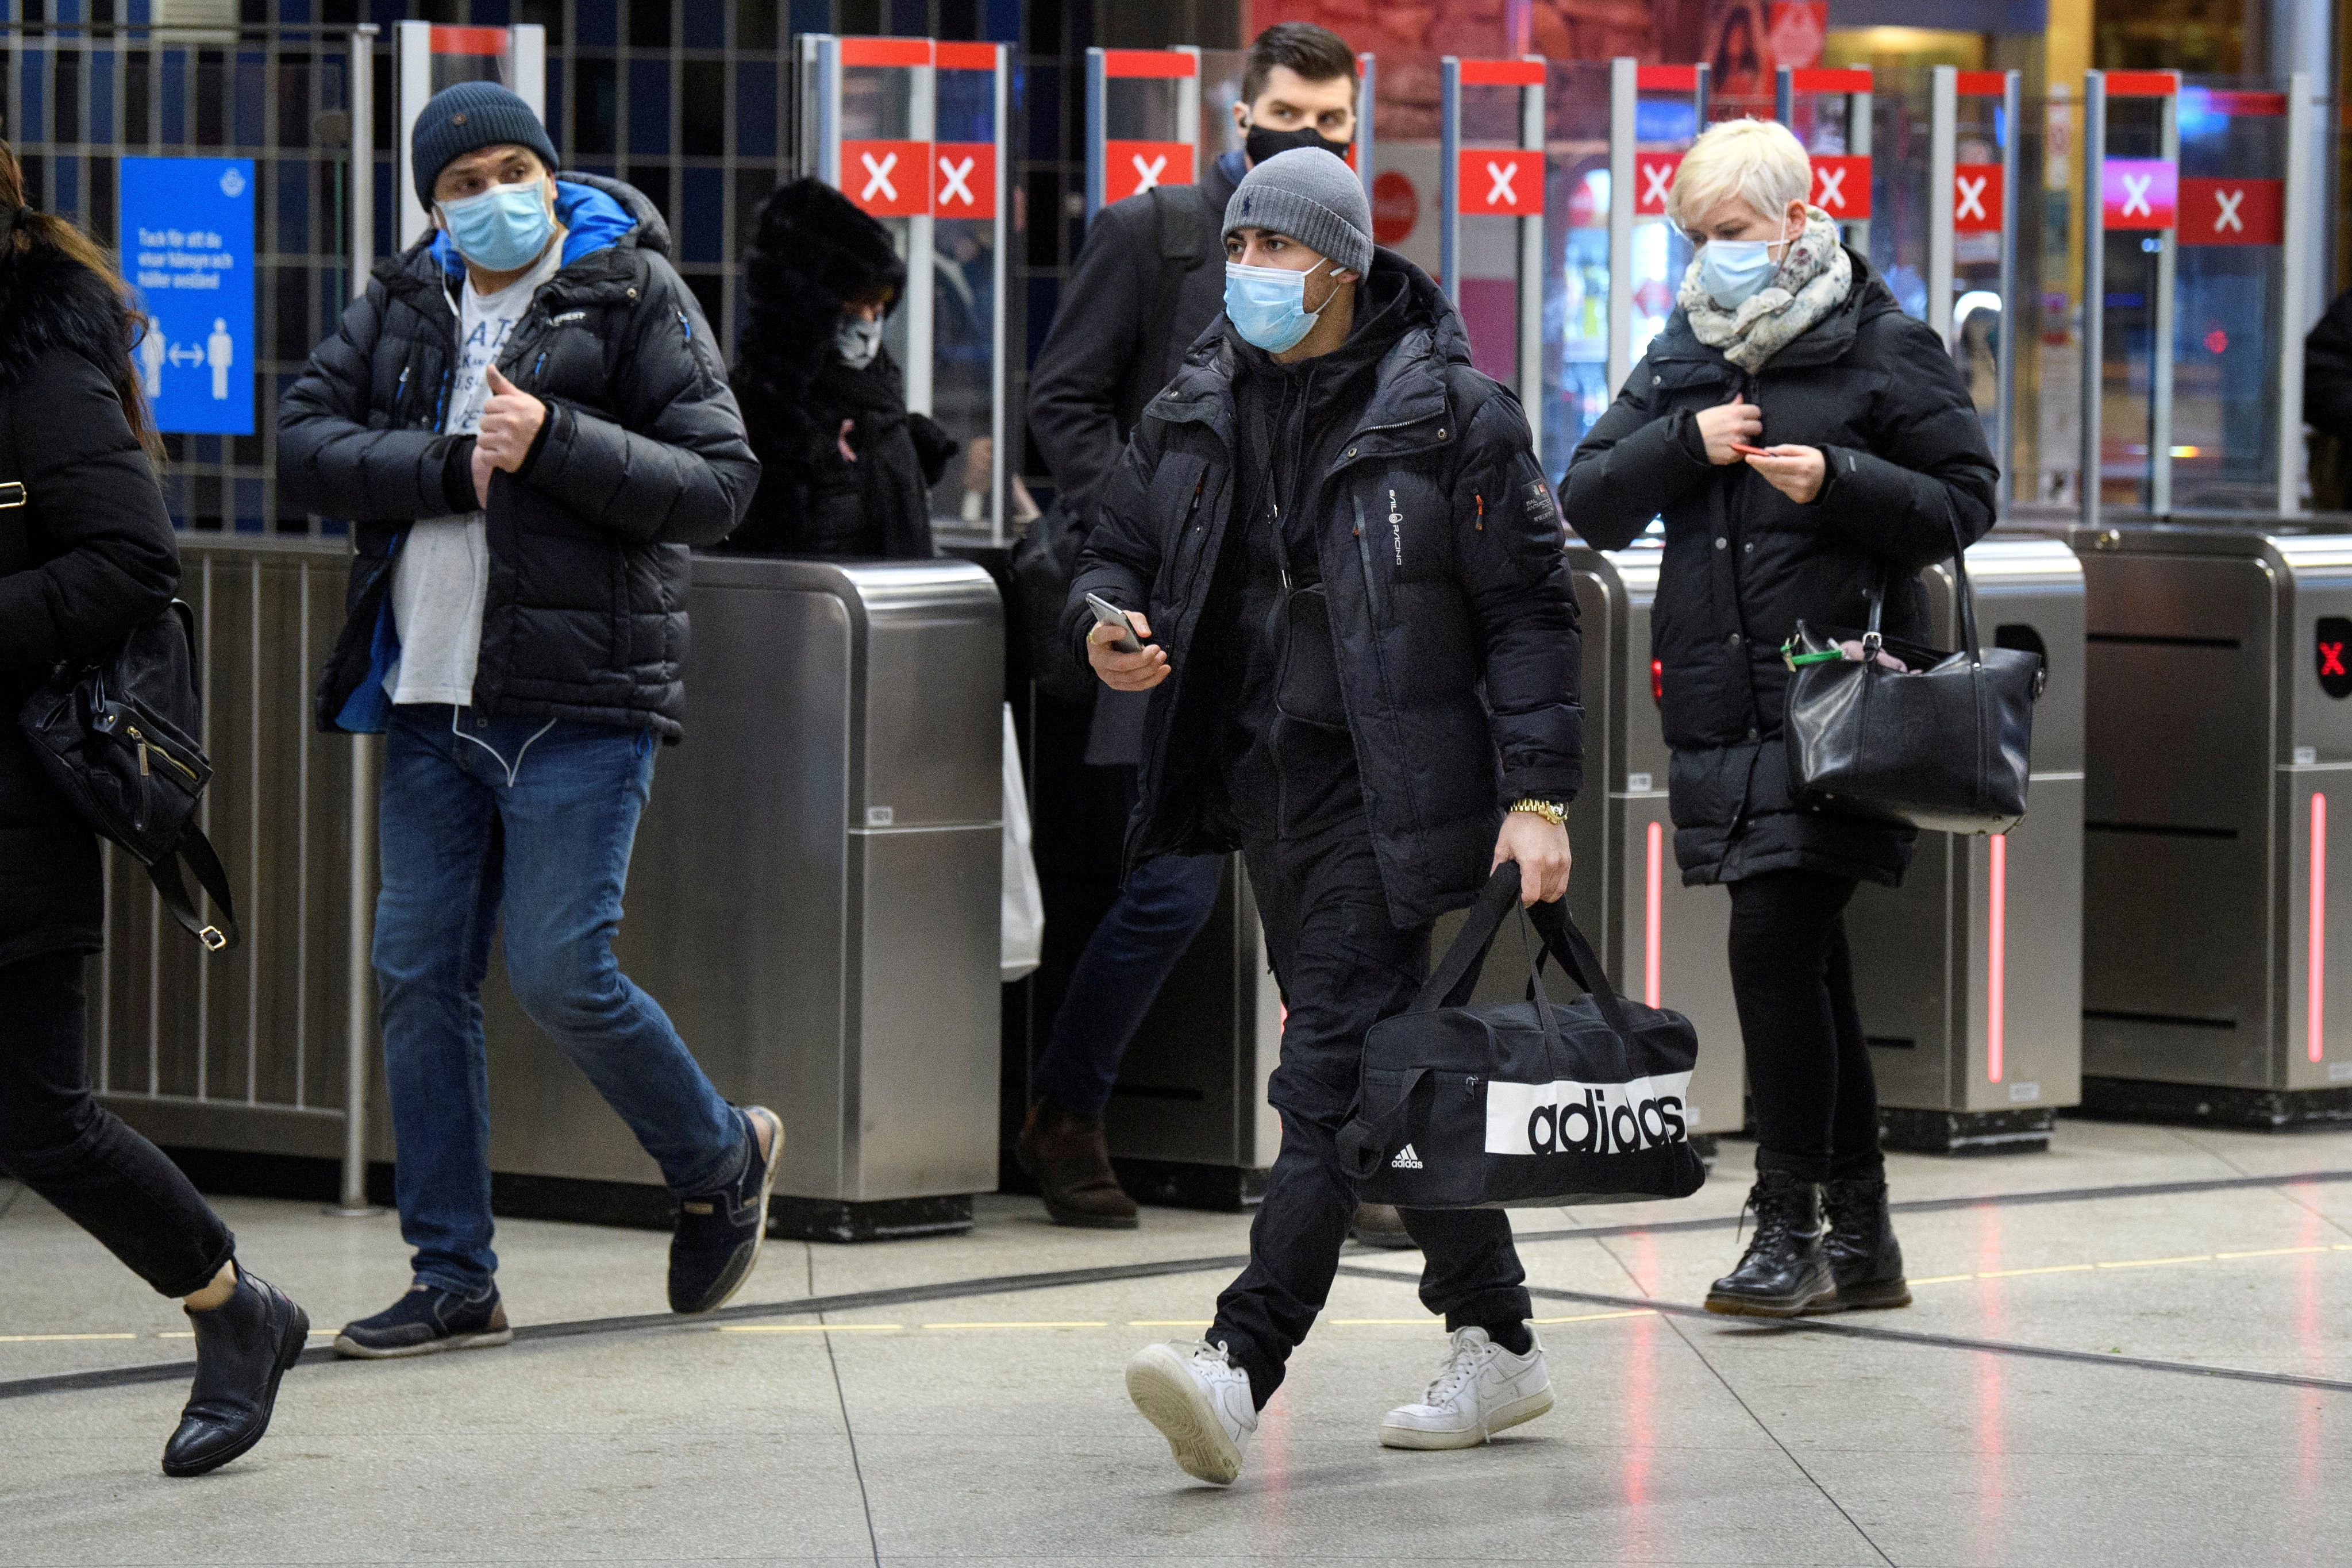 Passengers wearing protective masks enter an underground railway station, amid the spread of the coronavirus disease (COVID-19) pandemic, in Stockholm, Sweden, January 7, 2021. Jessica Gow/TT News Agency/via REUTERS/Files